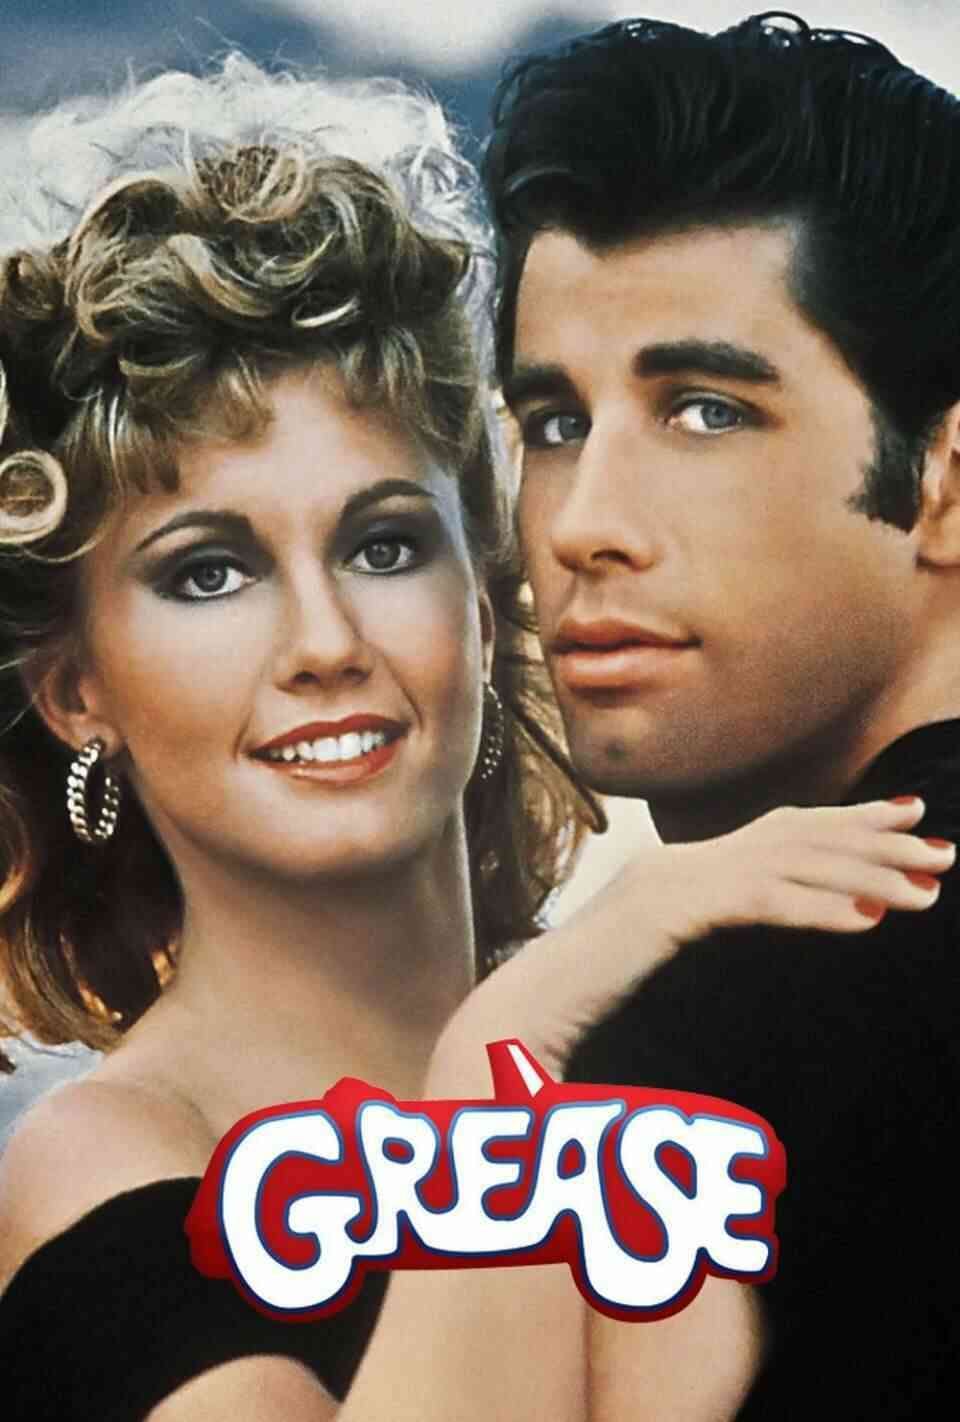 Read Grease screenplay (poster)